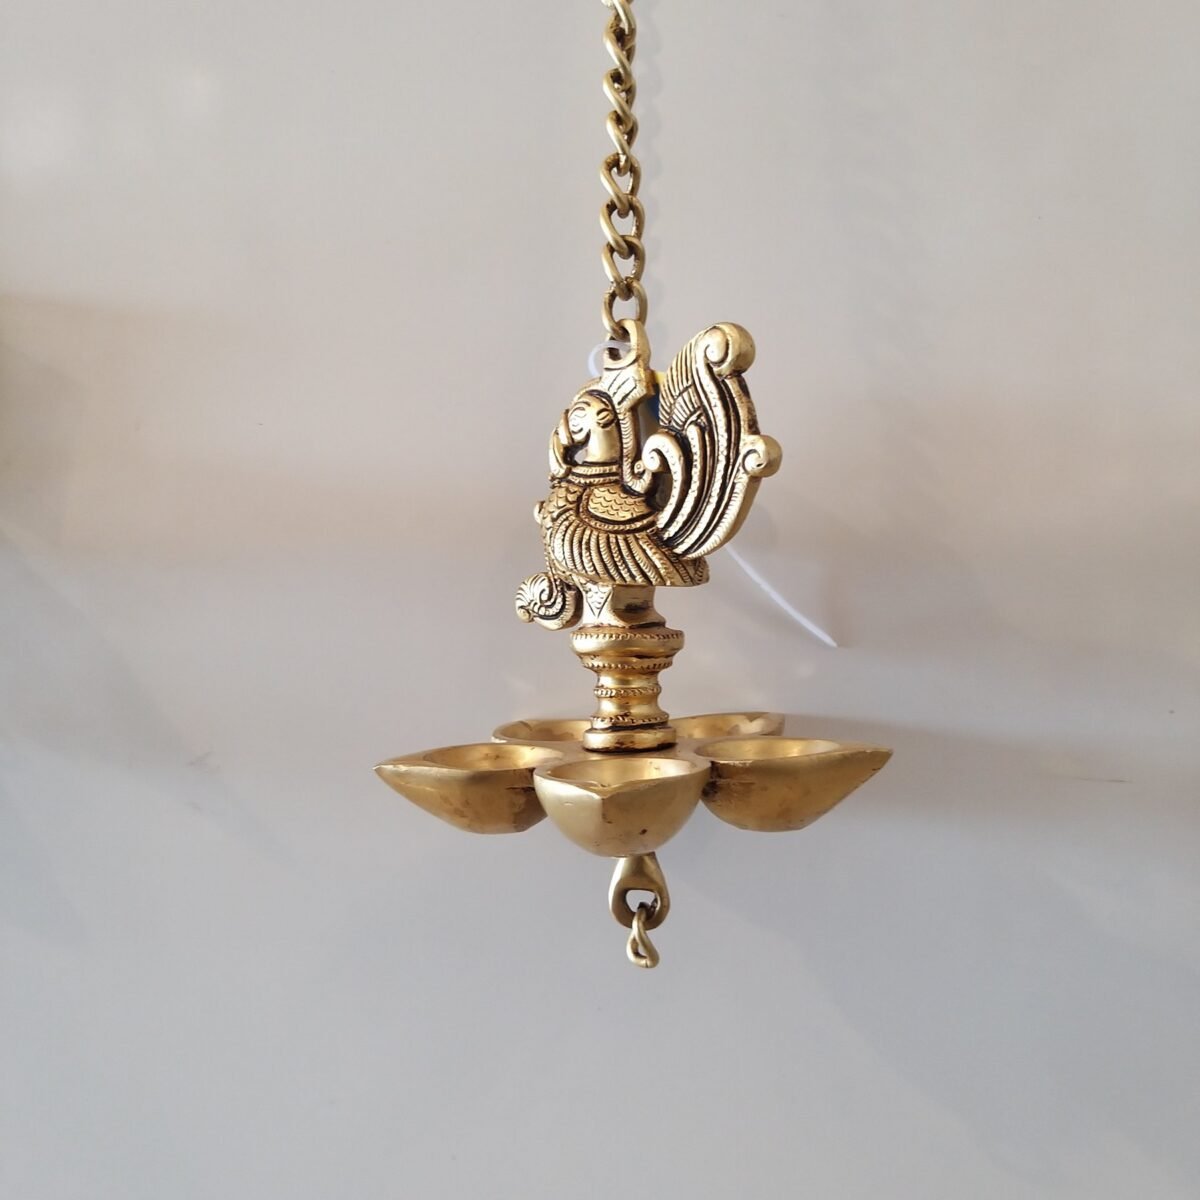 brass annam hanging lamp home decor gift pooja items buy online india 10415